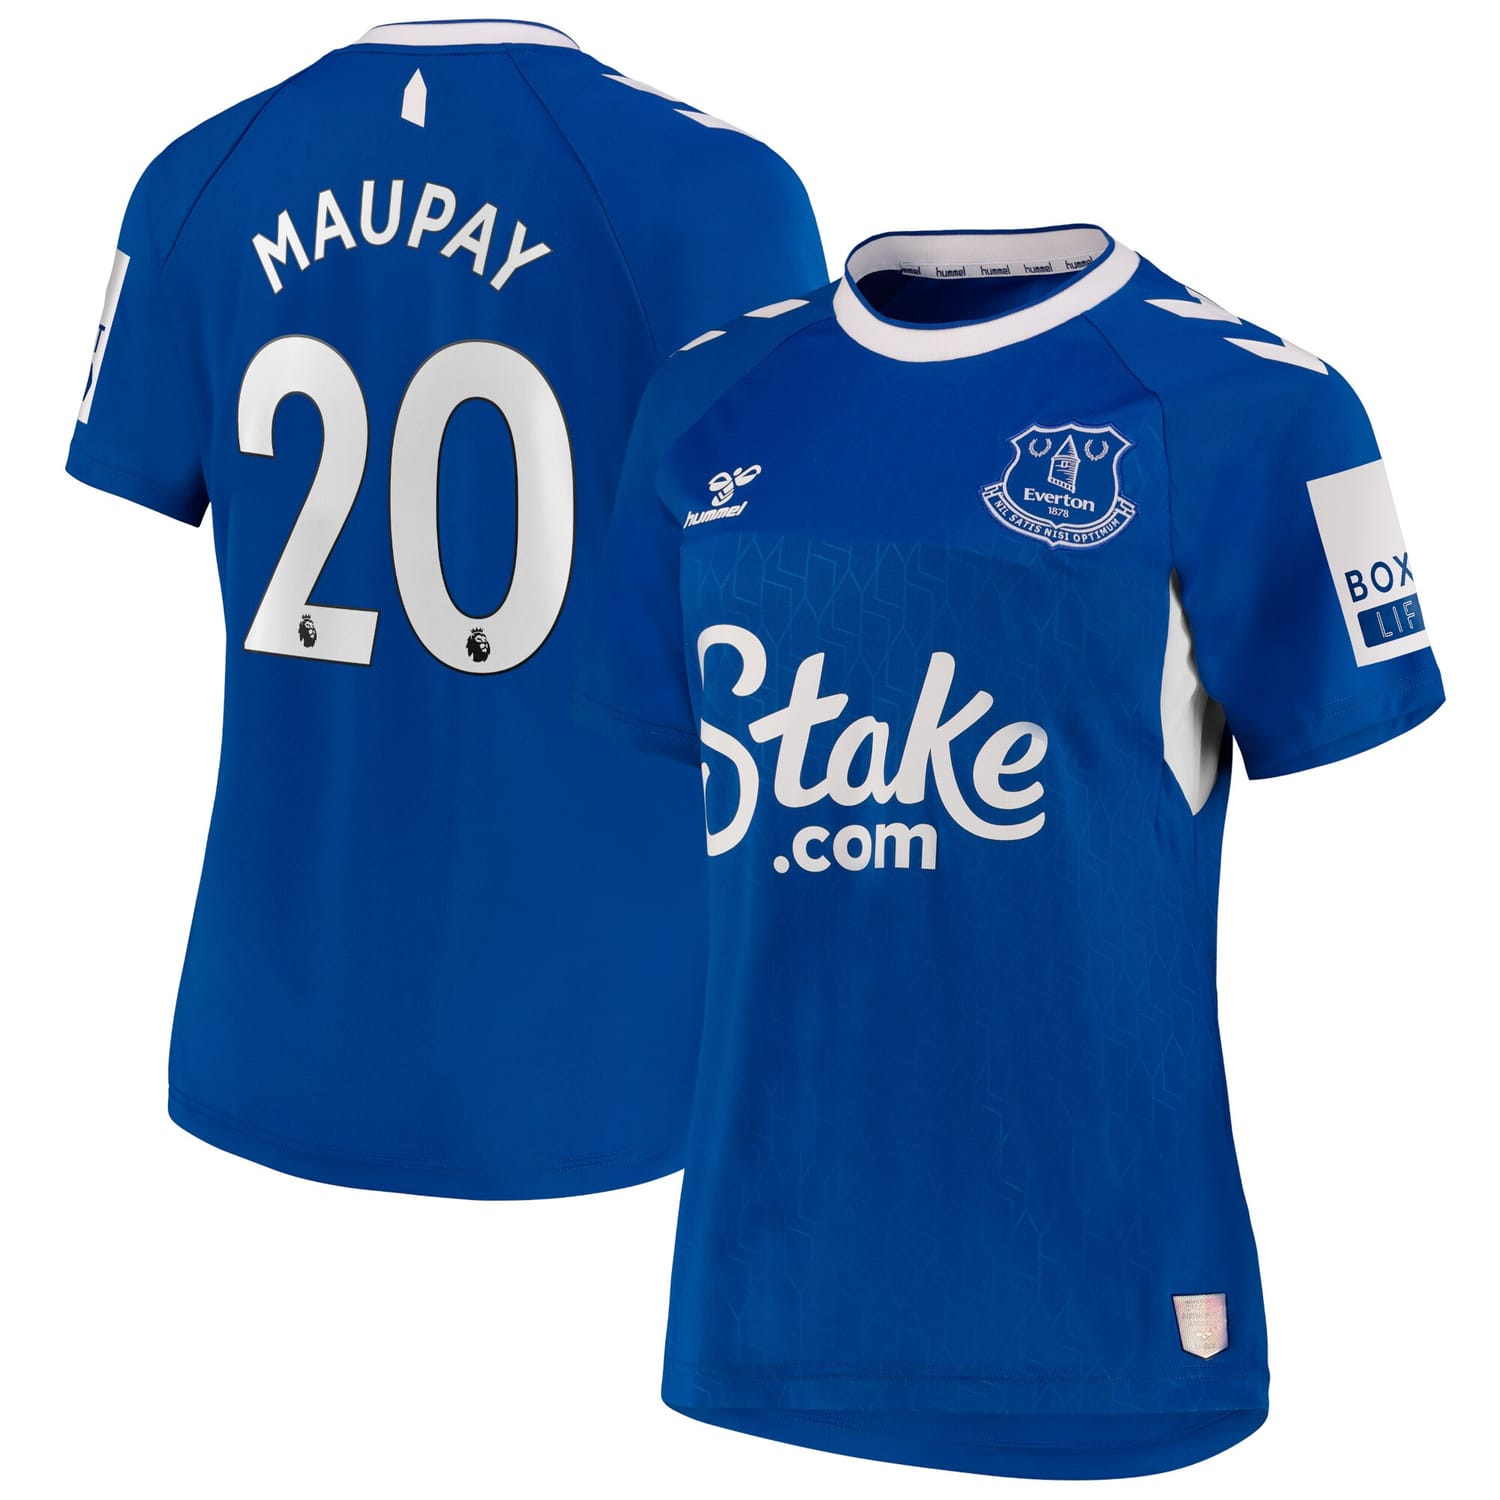 Premier League Everton Home Jersey Shirt 2022-23 player Neal Maupay 20 printing for Women